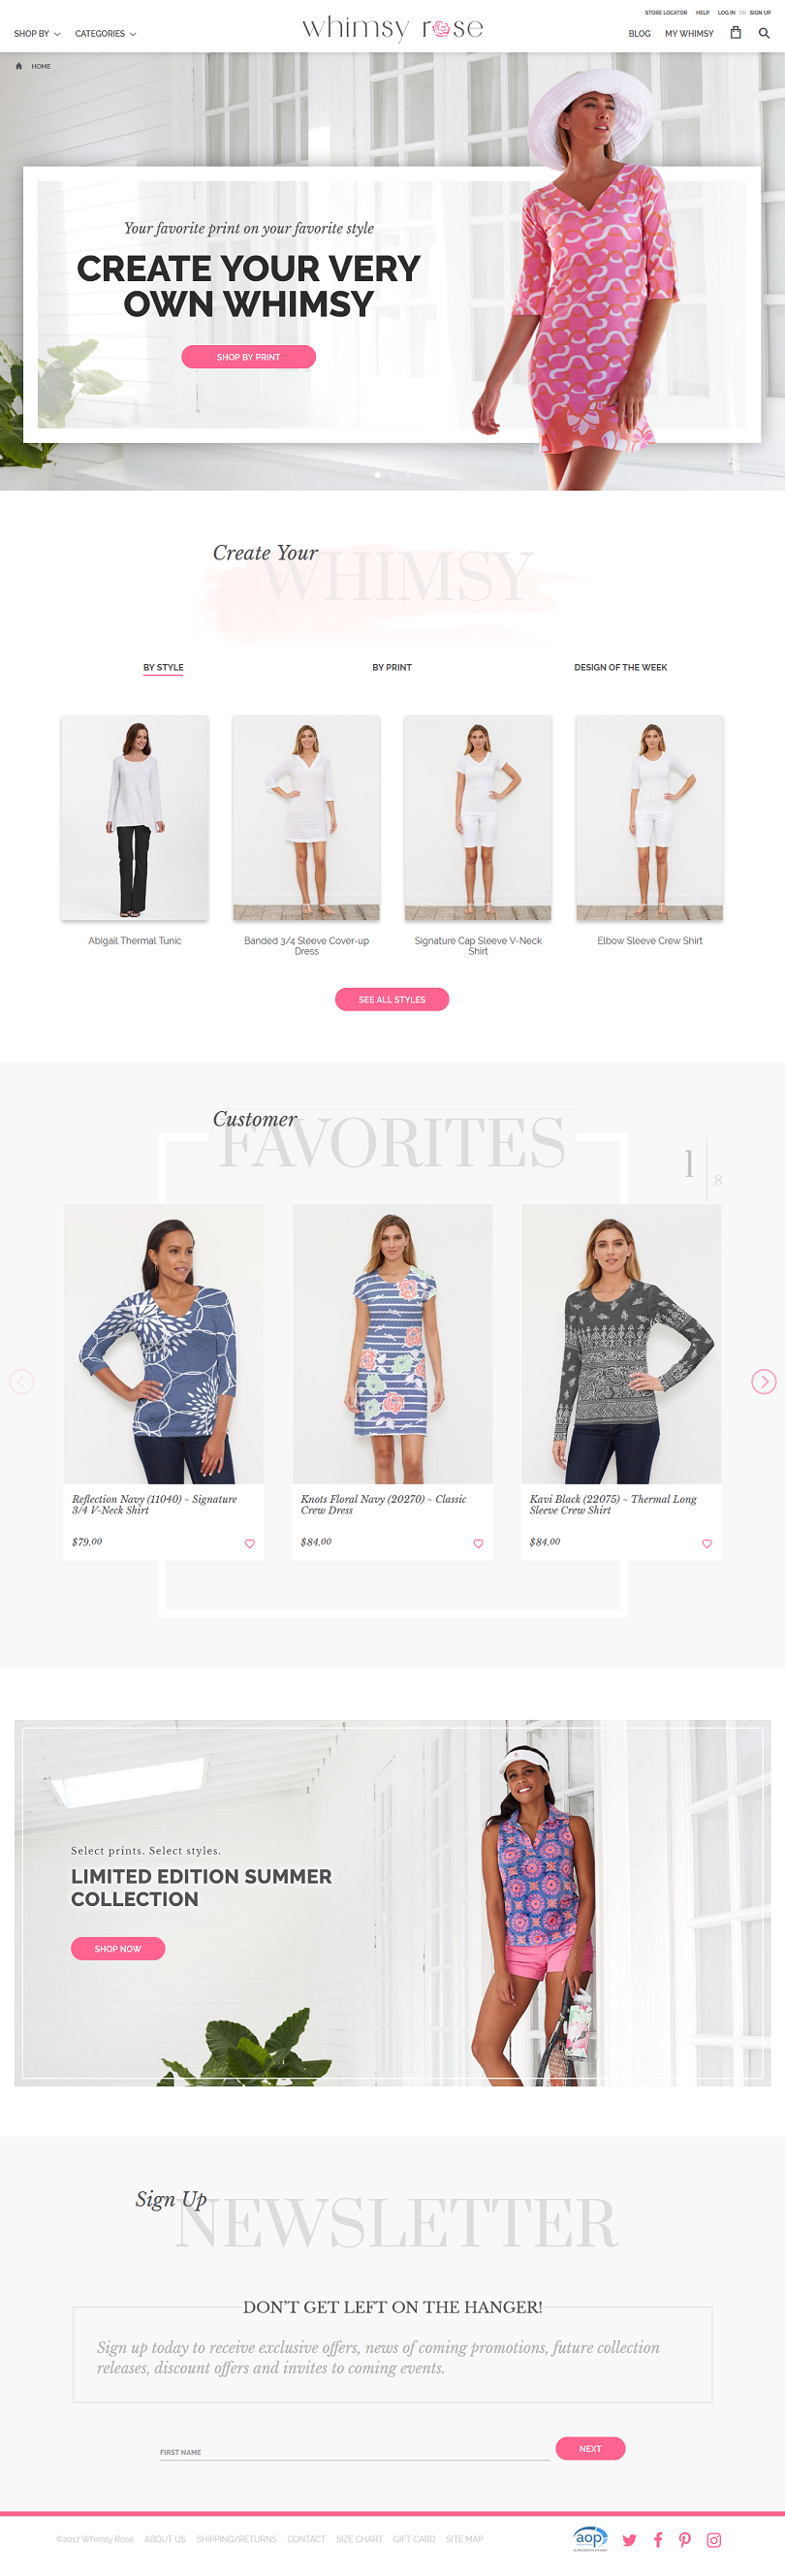 How Whimsy Rose Uses The Shopify Plus Api To Co-Create Personalized Fashion With Customers On Demand